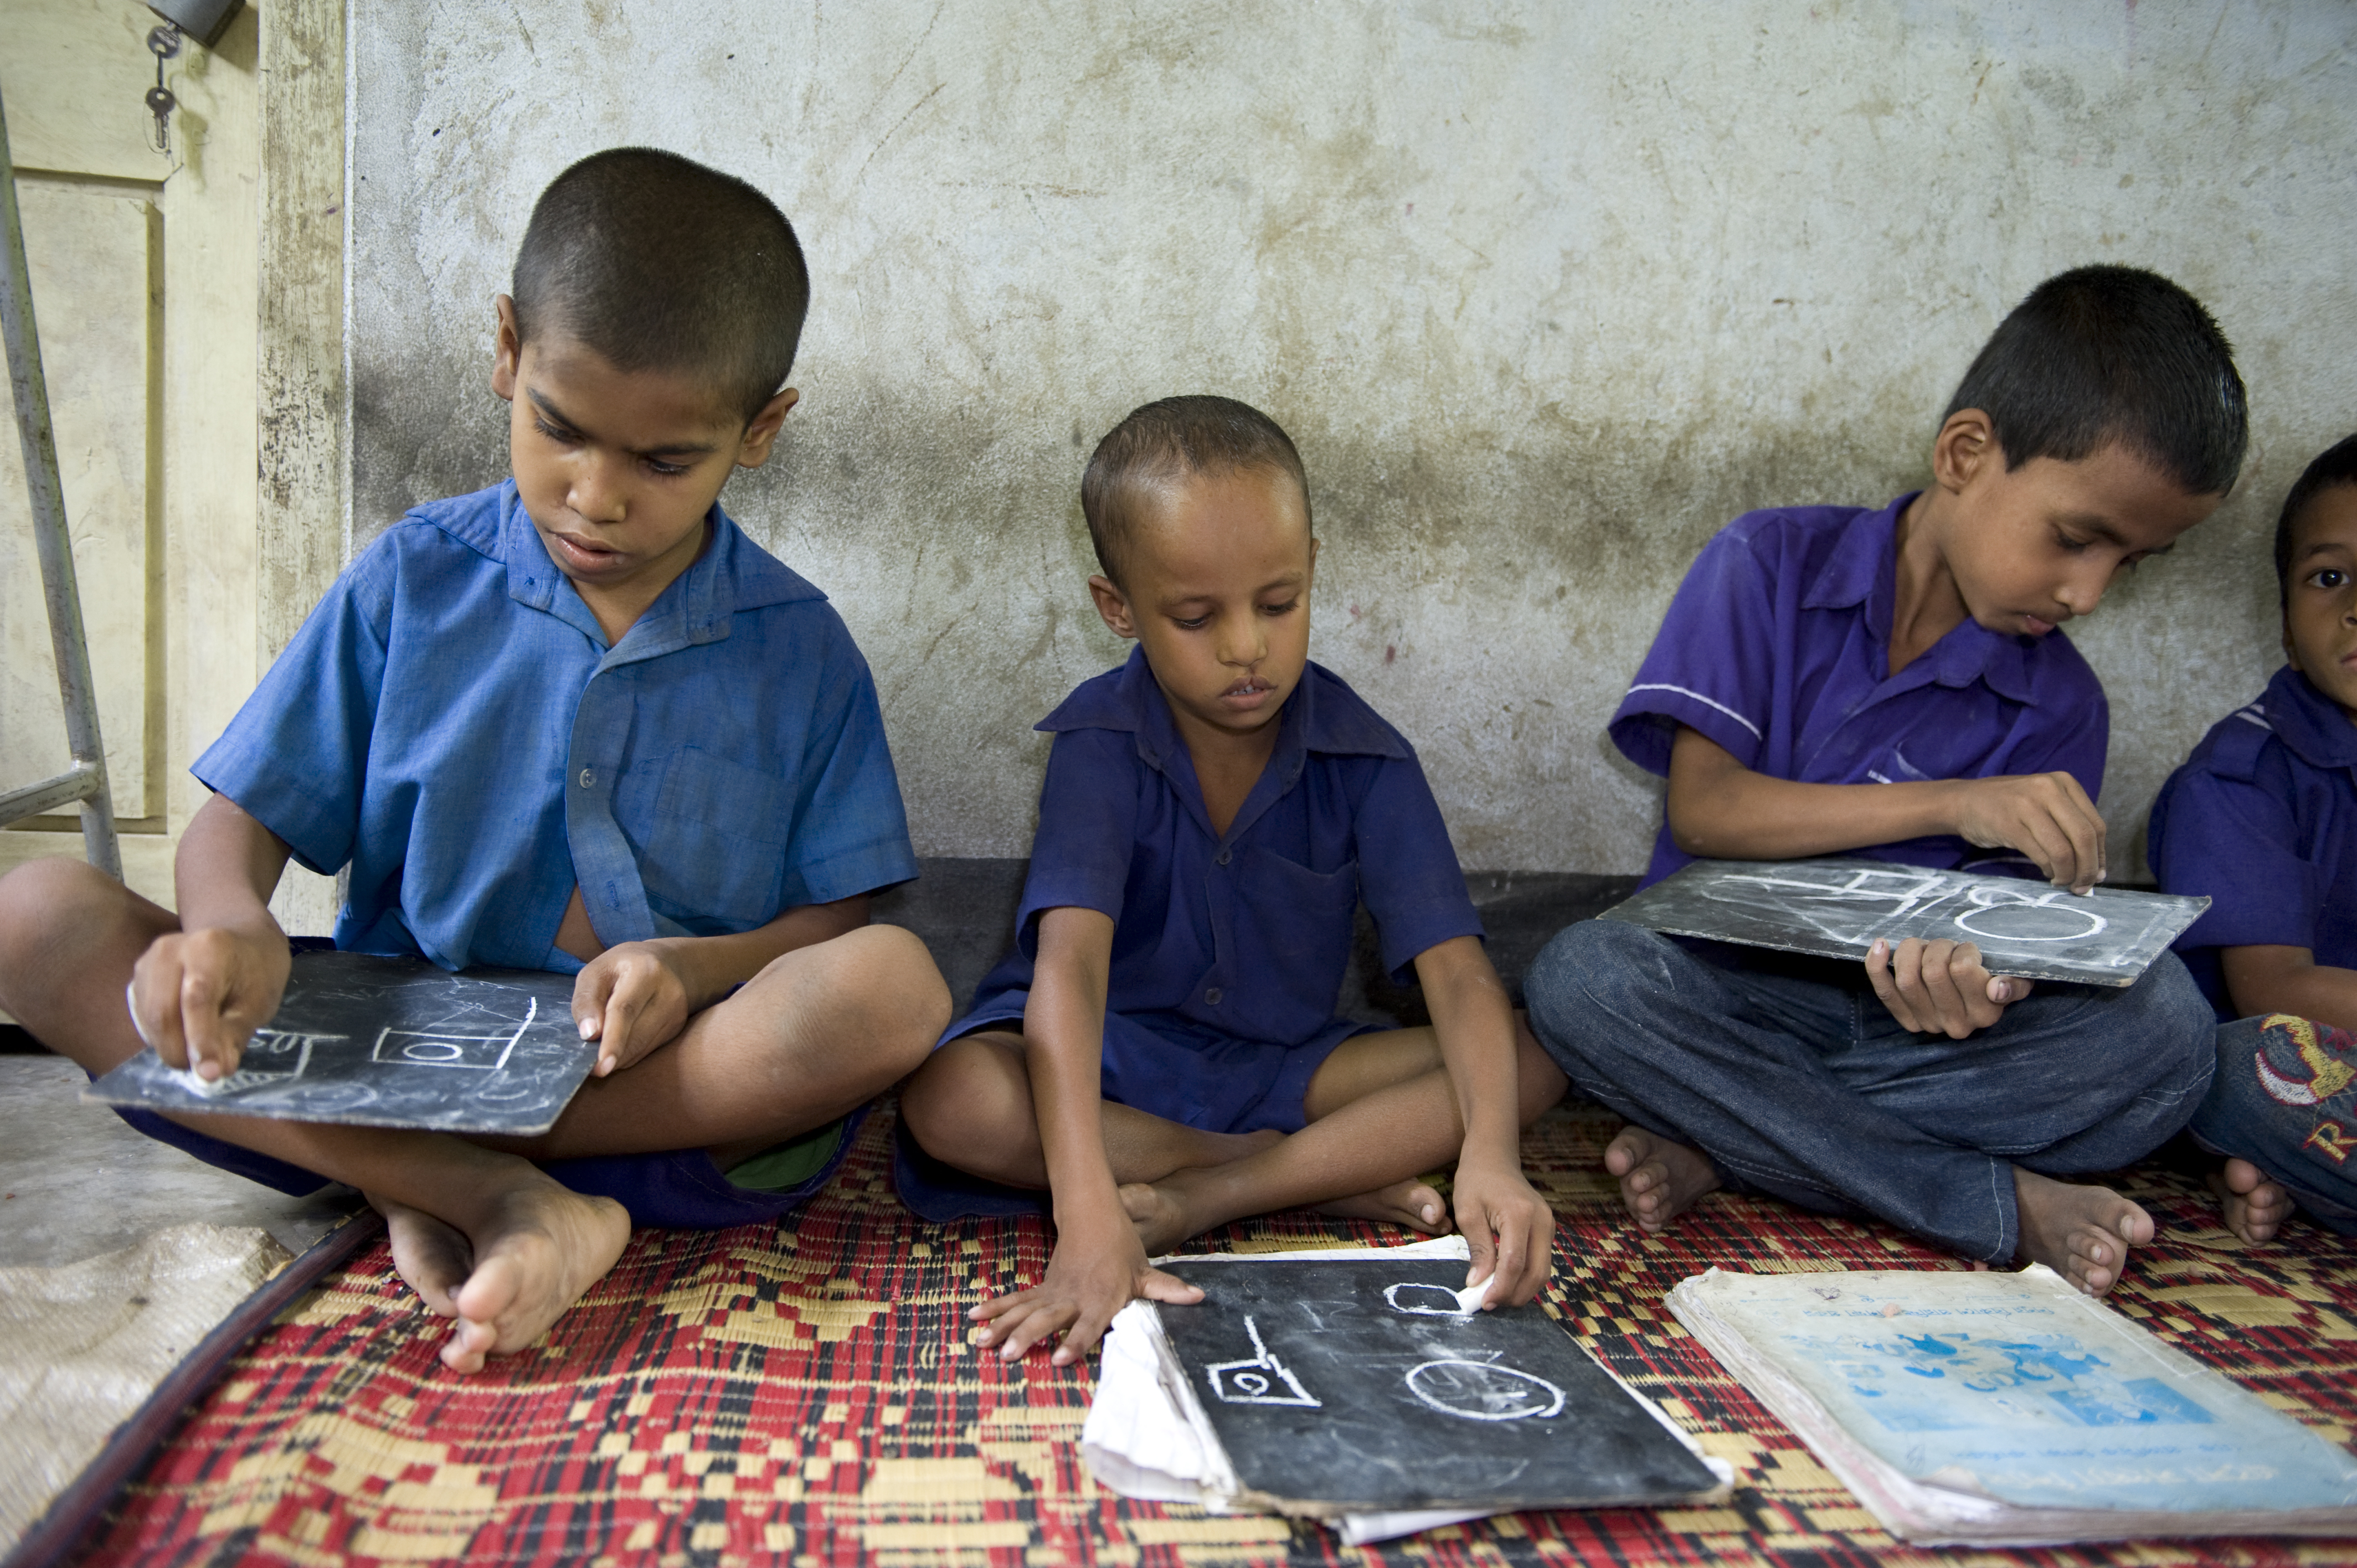 Left) Rashedul Uddin, 10, and his classmates are drawing on a chalkboard at Brahmankata Pre Primary School, Chakaria, Cox's Bazar, on 19 June 2011. Born with no impairments, between the ages of 4 and 5, Rashedul began to suffer paralysis throughout his body, affecting not only his movement but also his speech. He comes to school alone with the help of a crutches and loves to study.